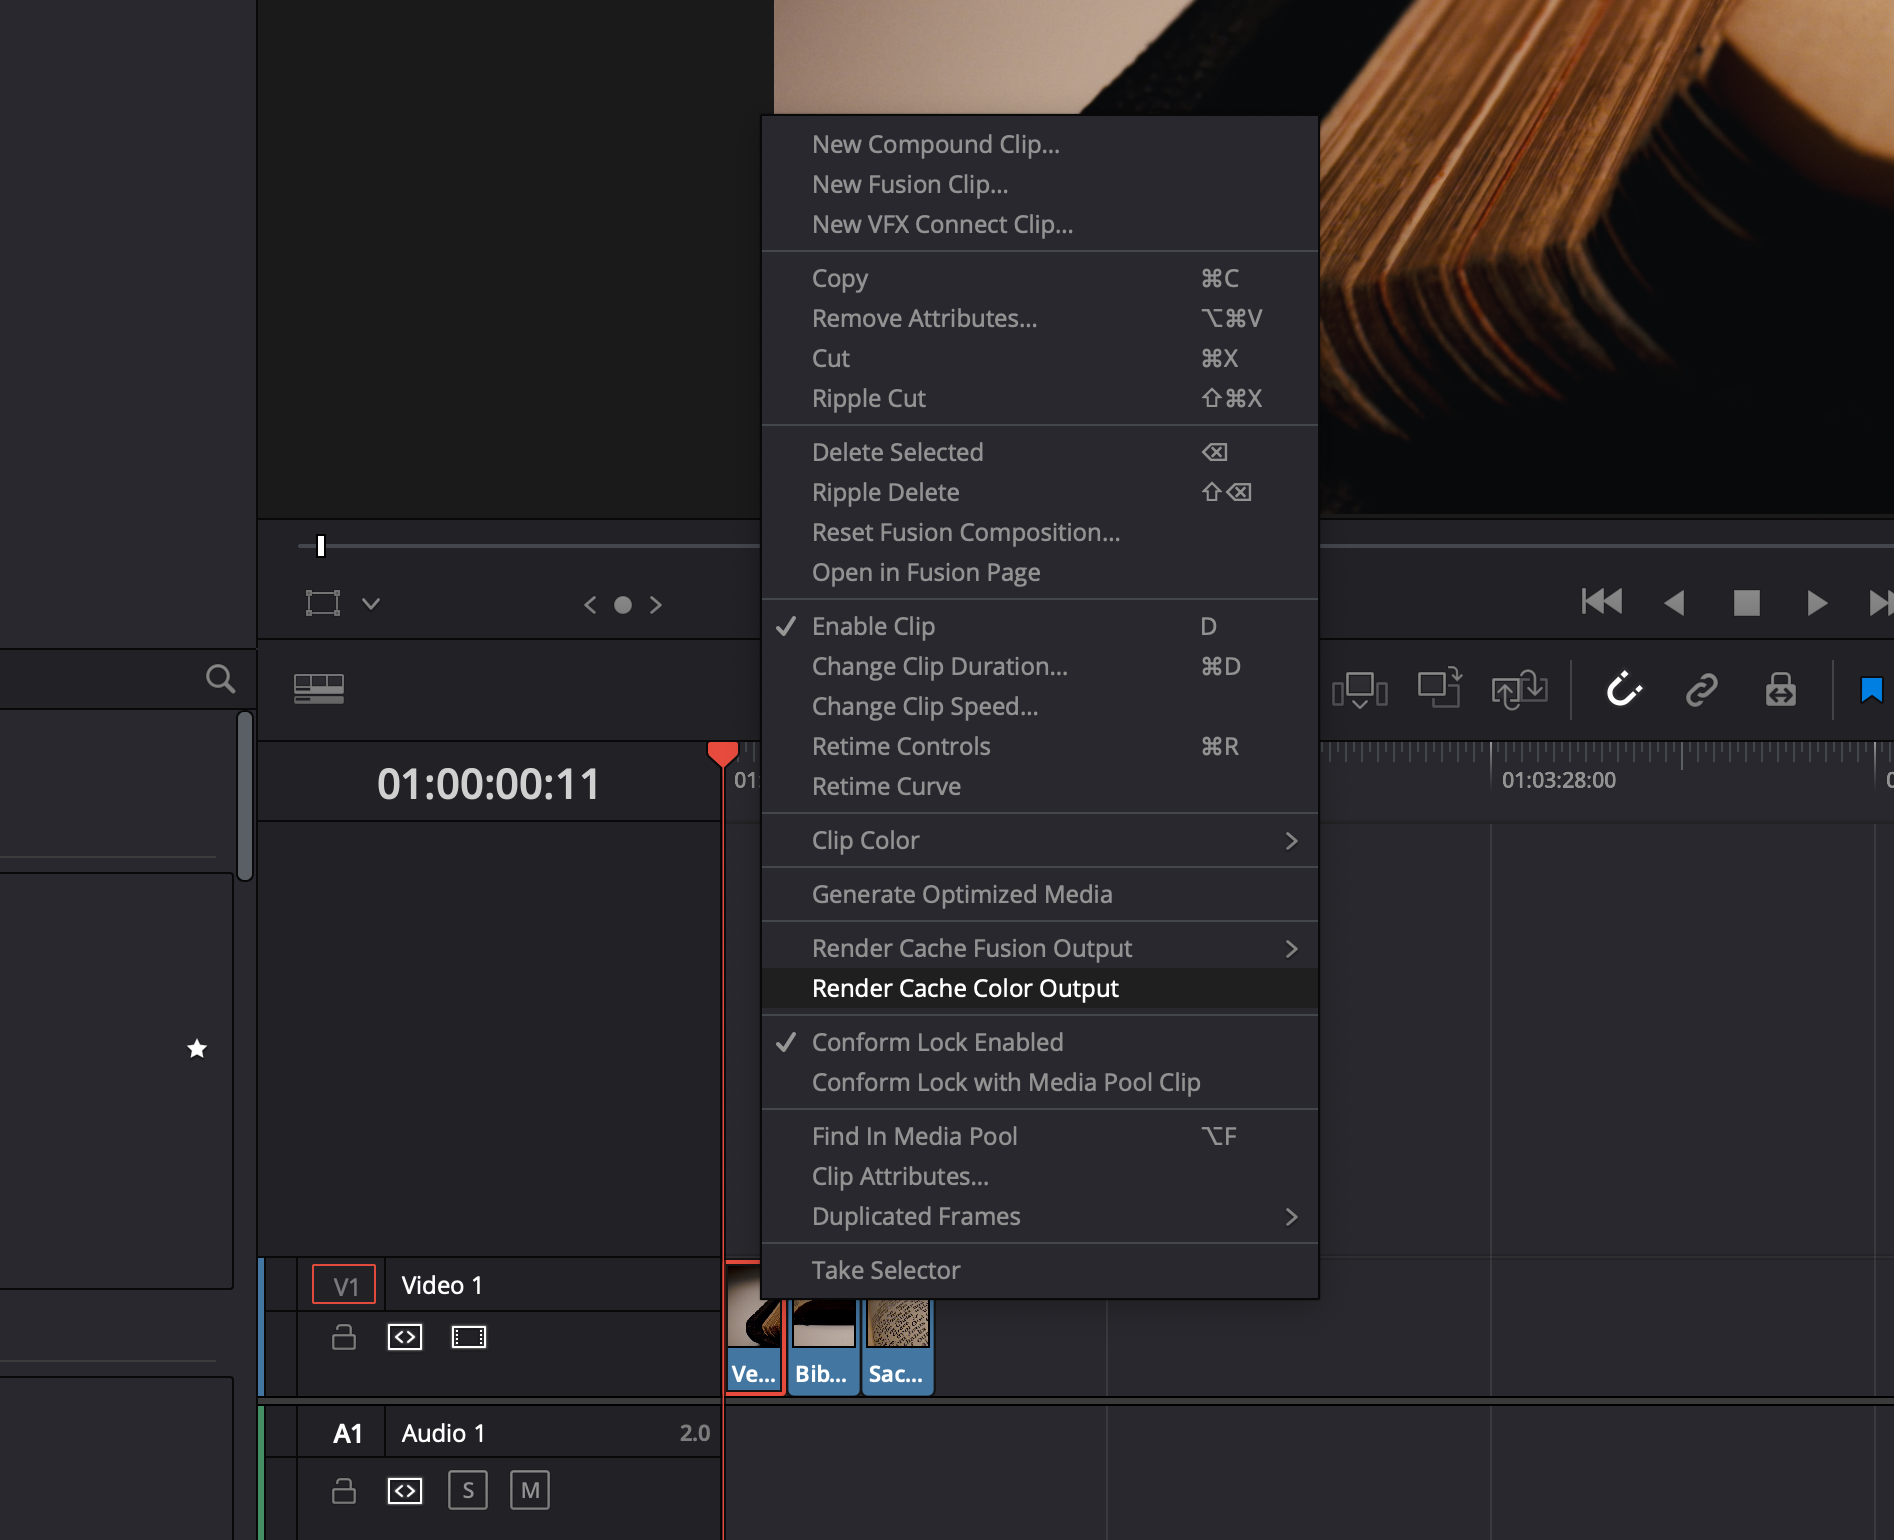 Render Cache Color Output to have your coloring and visual effects playback smoothly